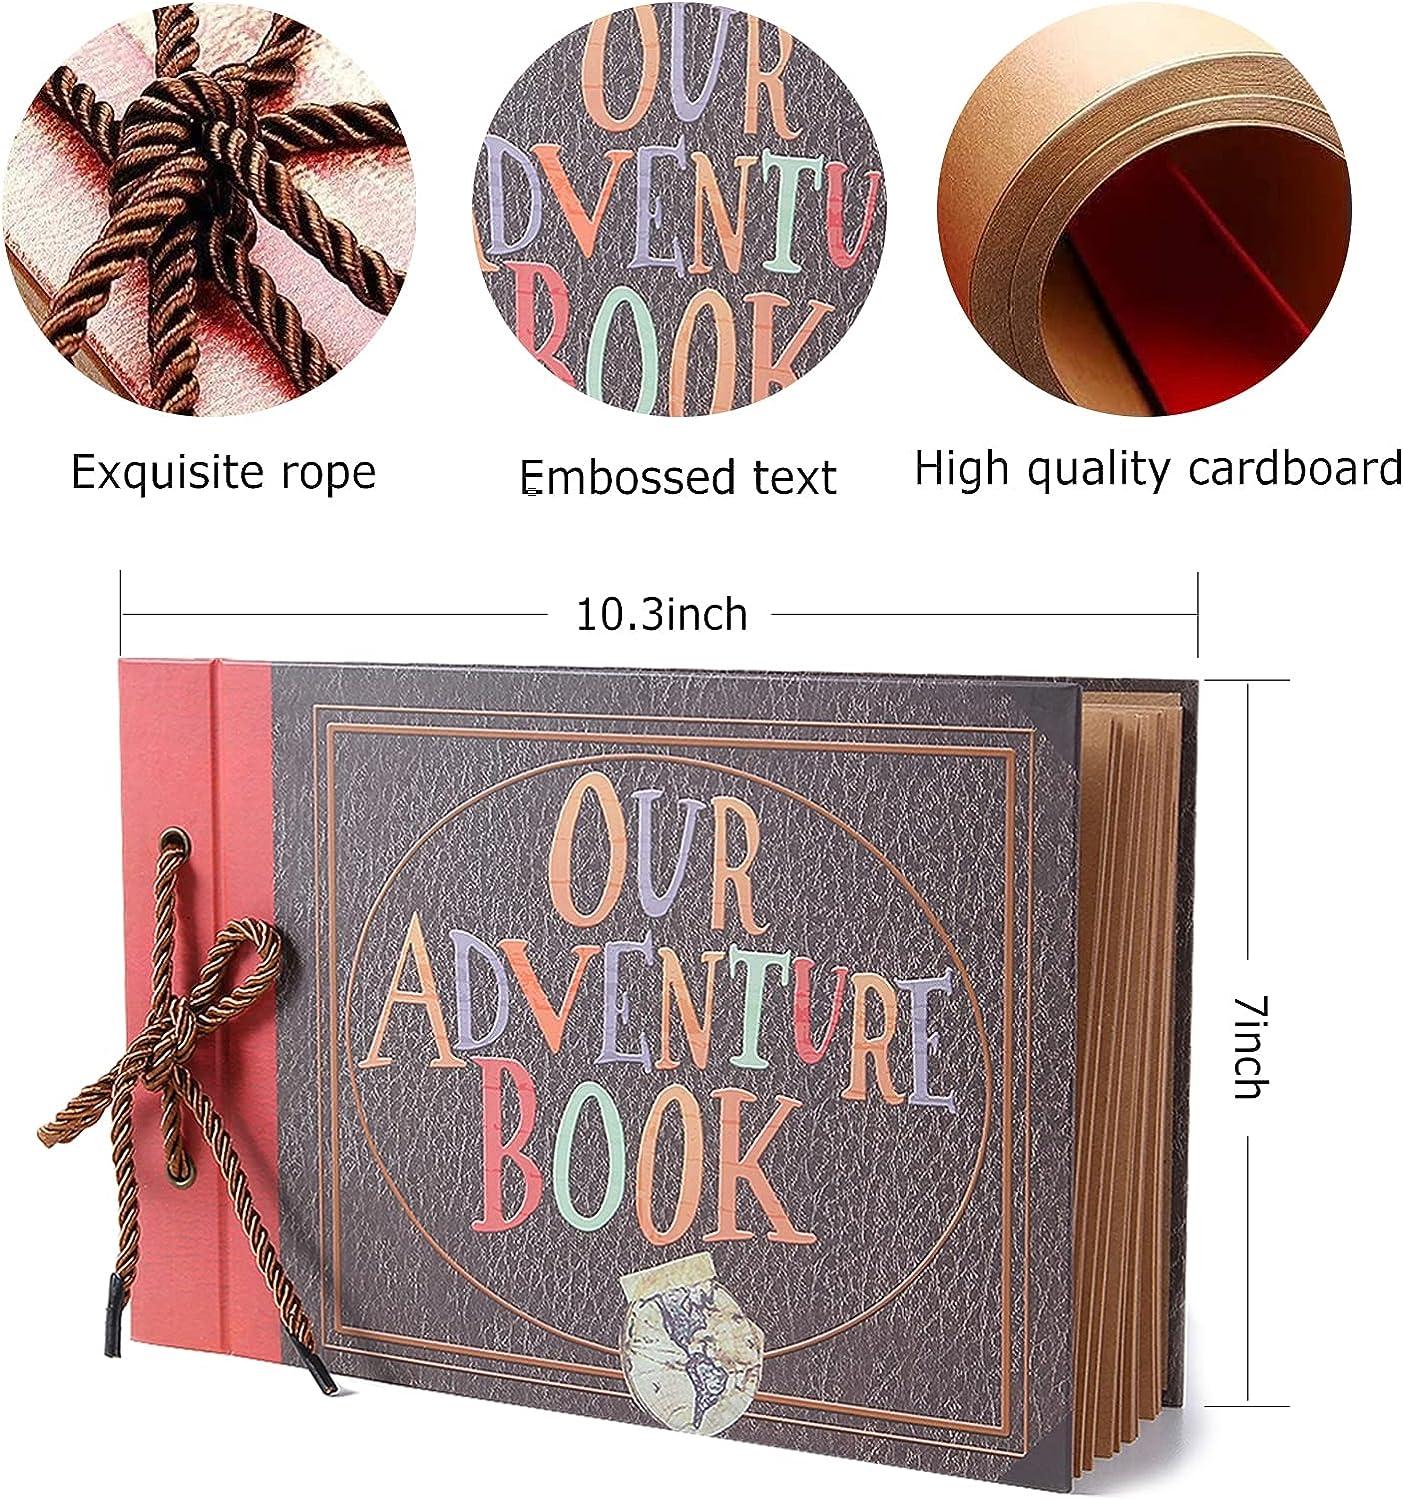 OUR ADVENTURE BOOK